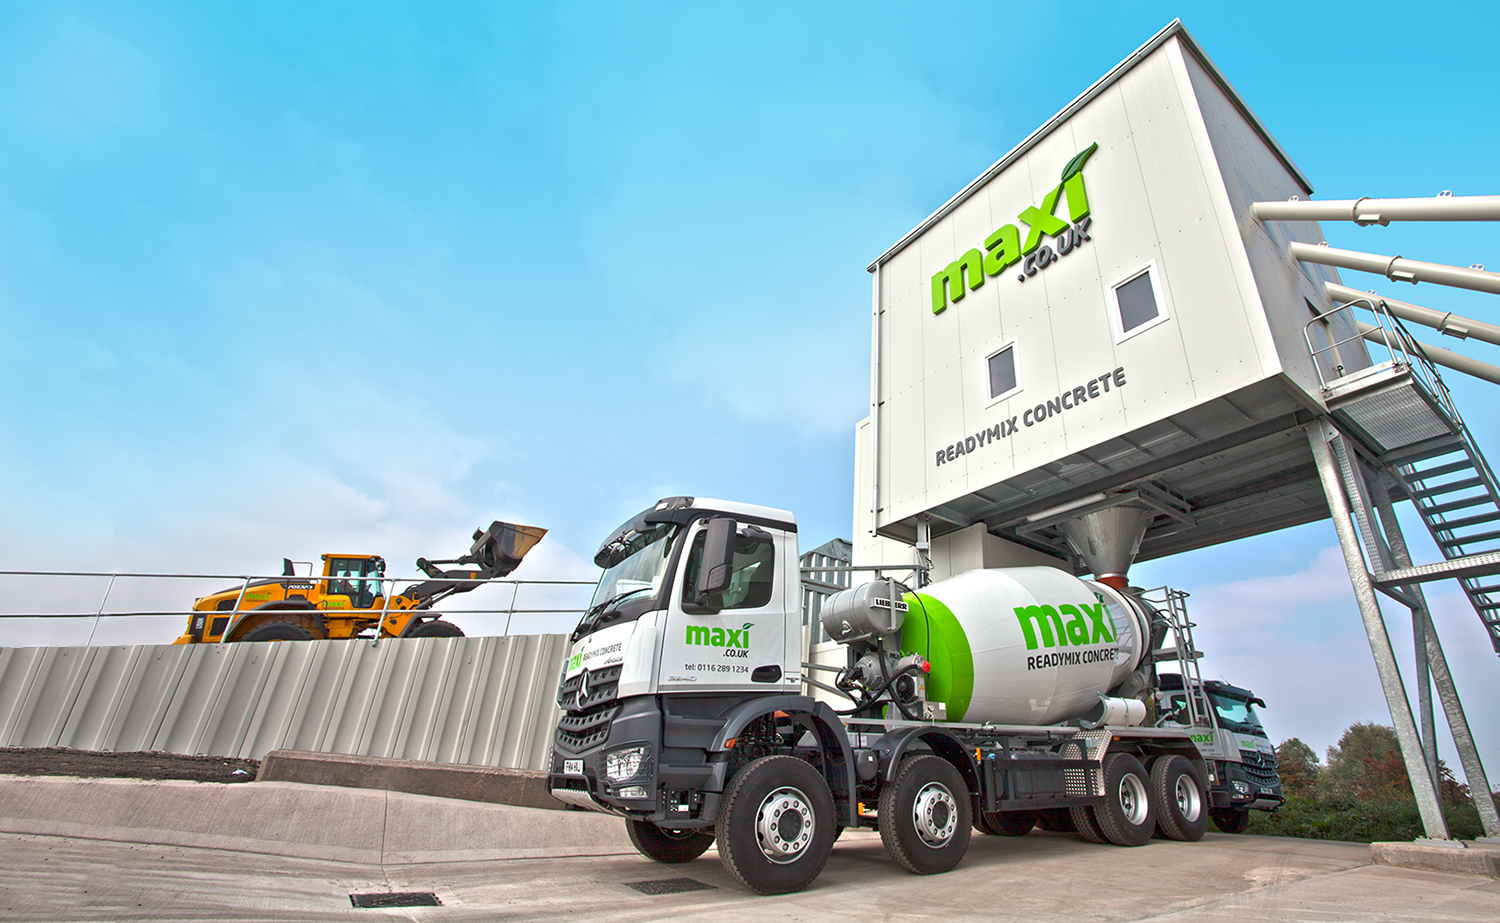 Maxi Readymix Concrete sold to Aggregate Industries